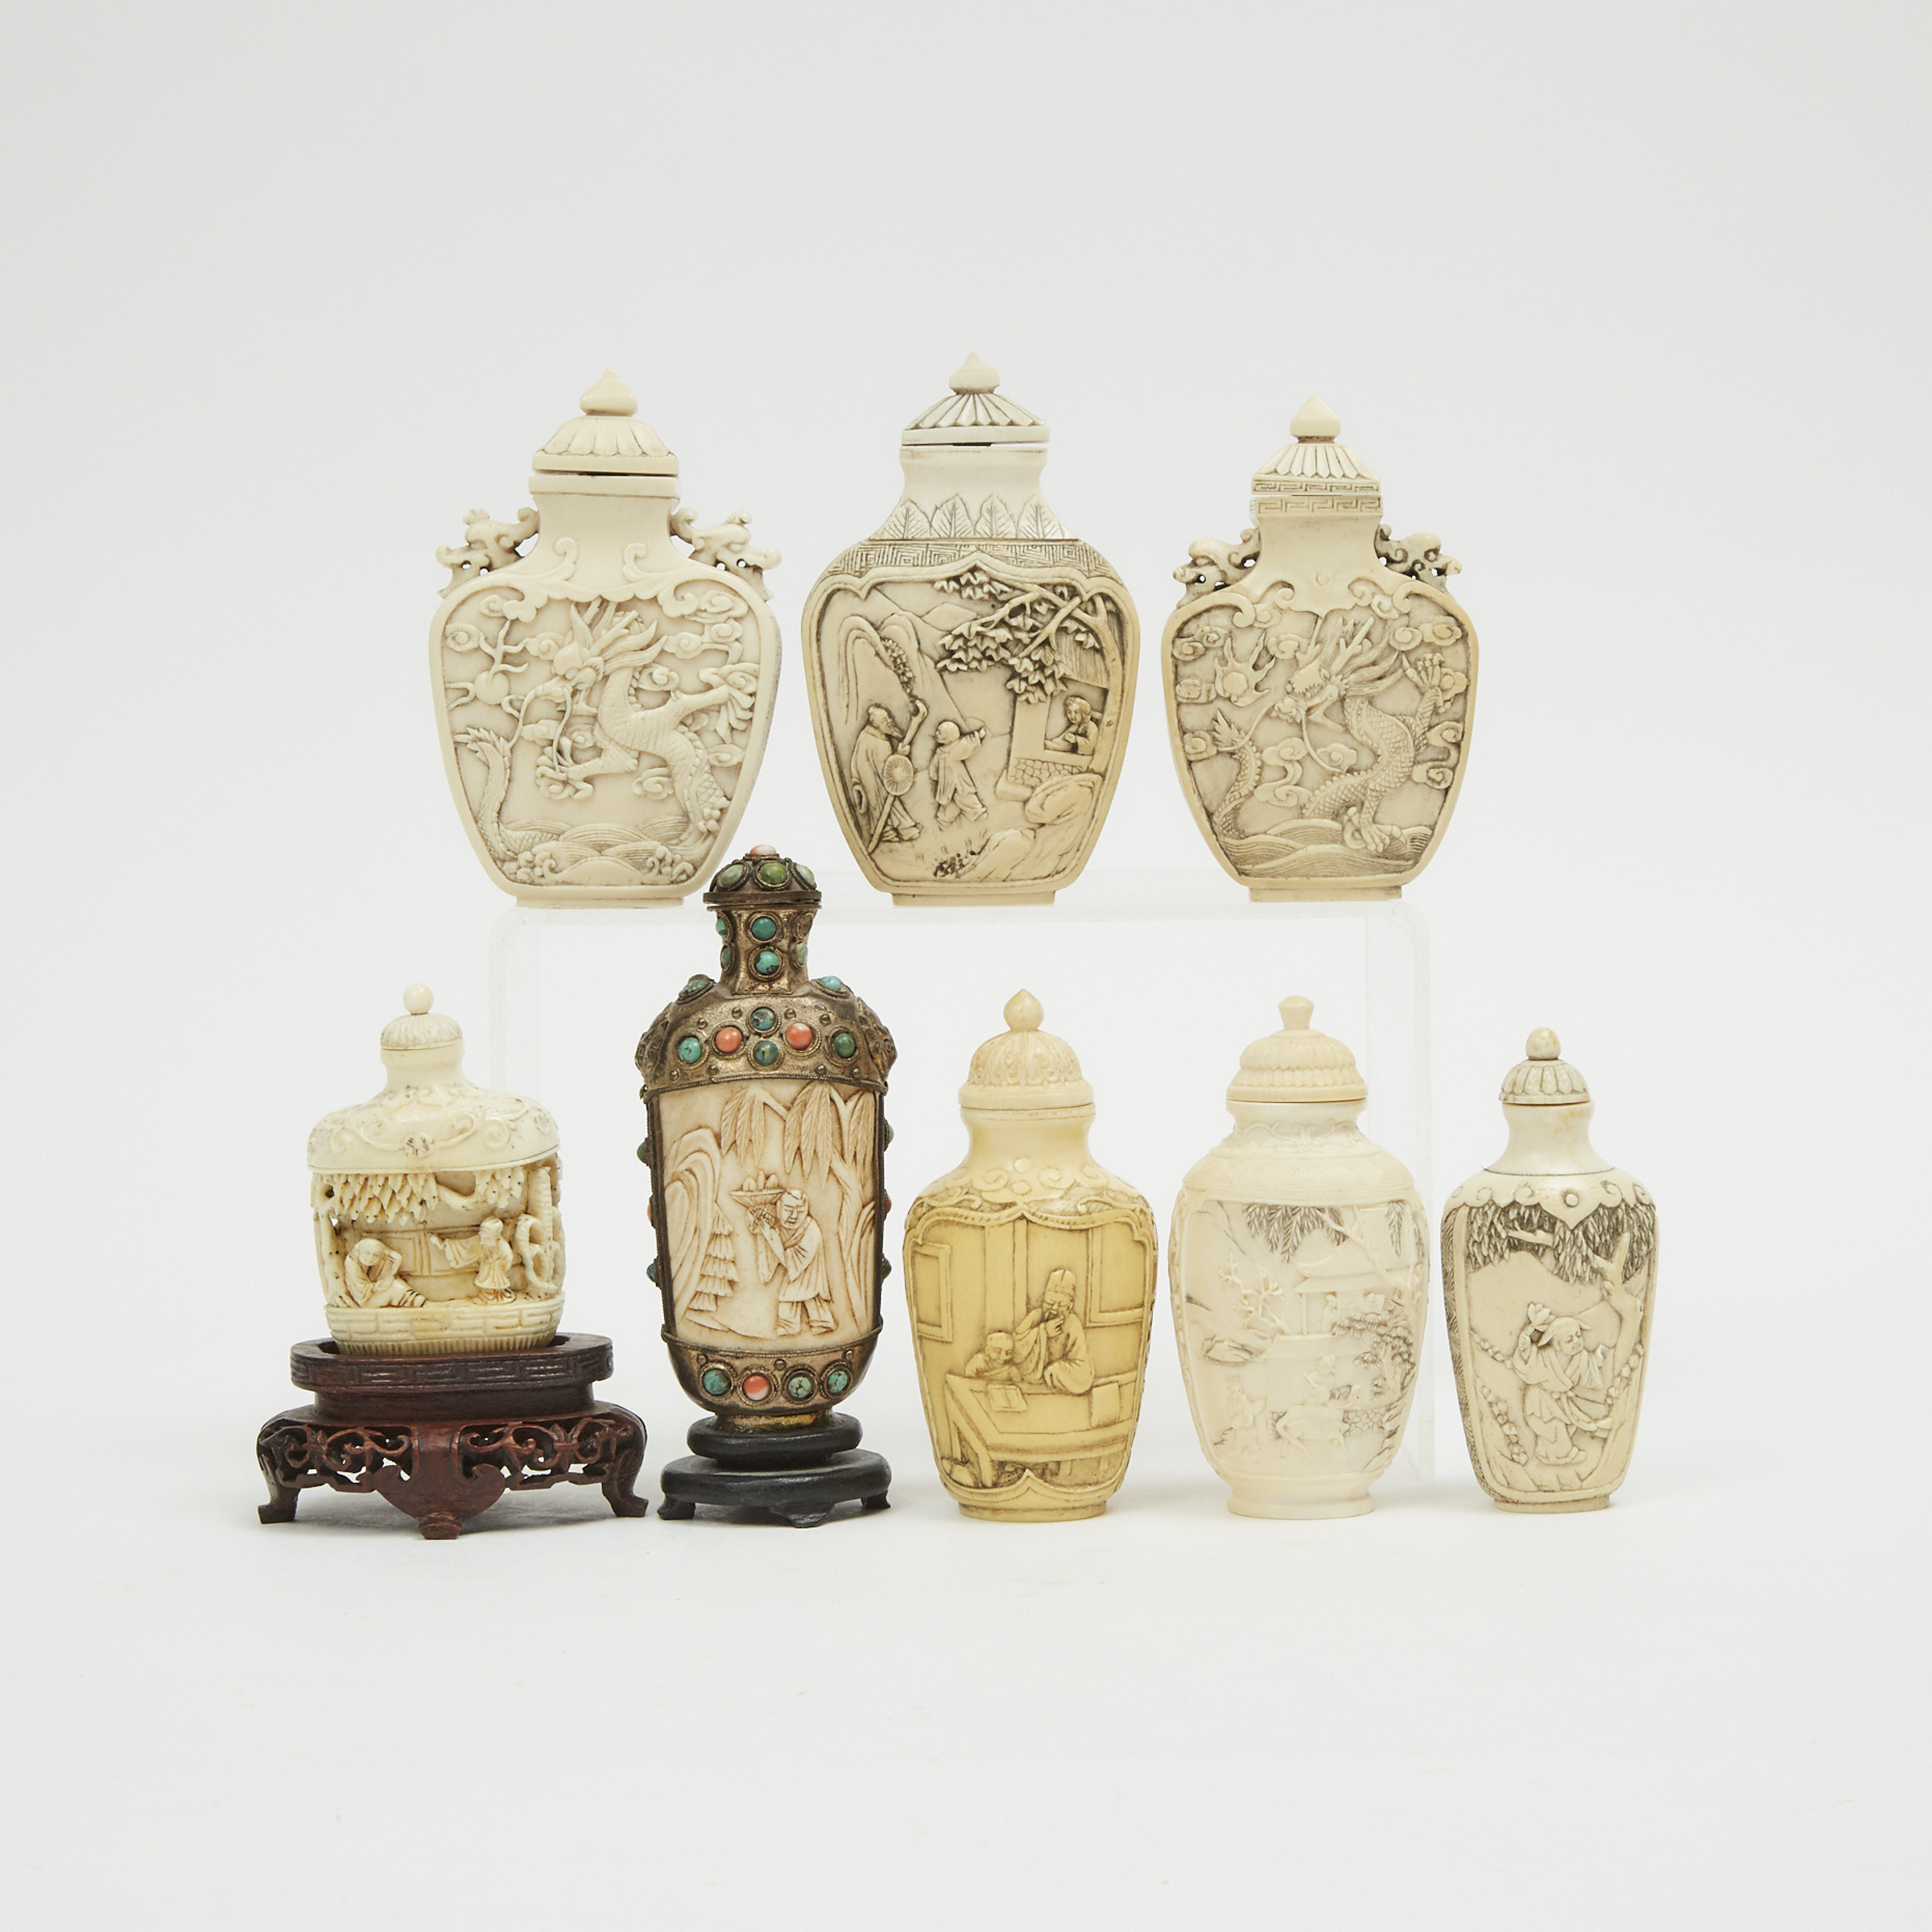 A Group of Eight Ivory and Bone Carved Snuff Bottles